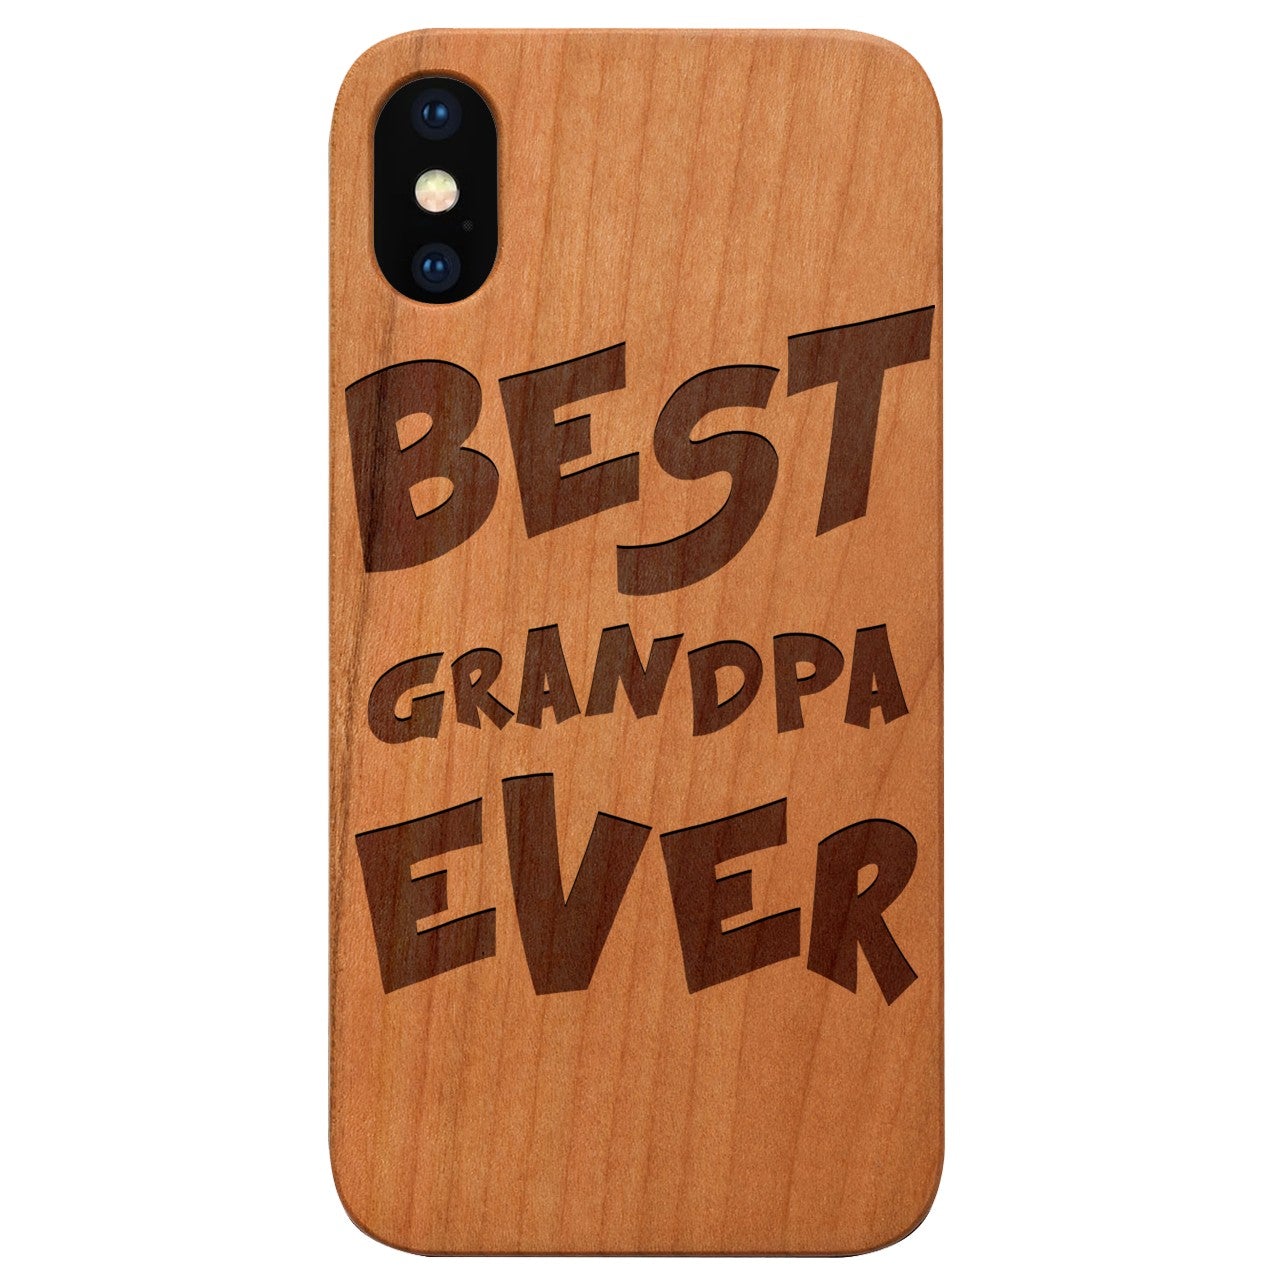  Best Grandpa Ever - Engraved - Wooden Phone Case - IPhone 13 Models